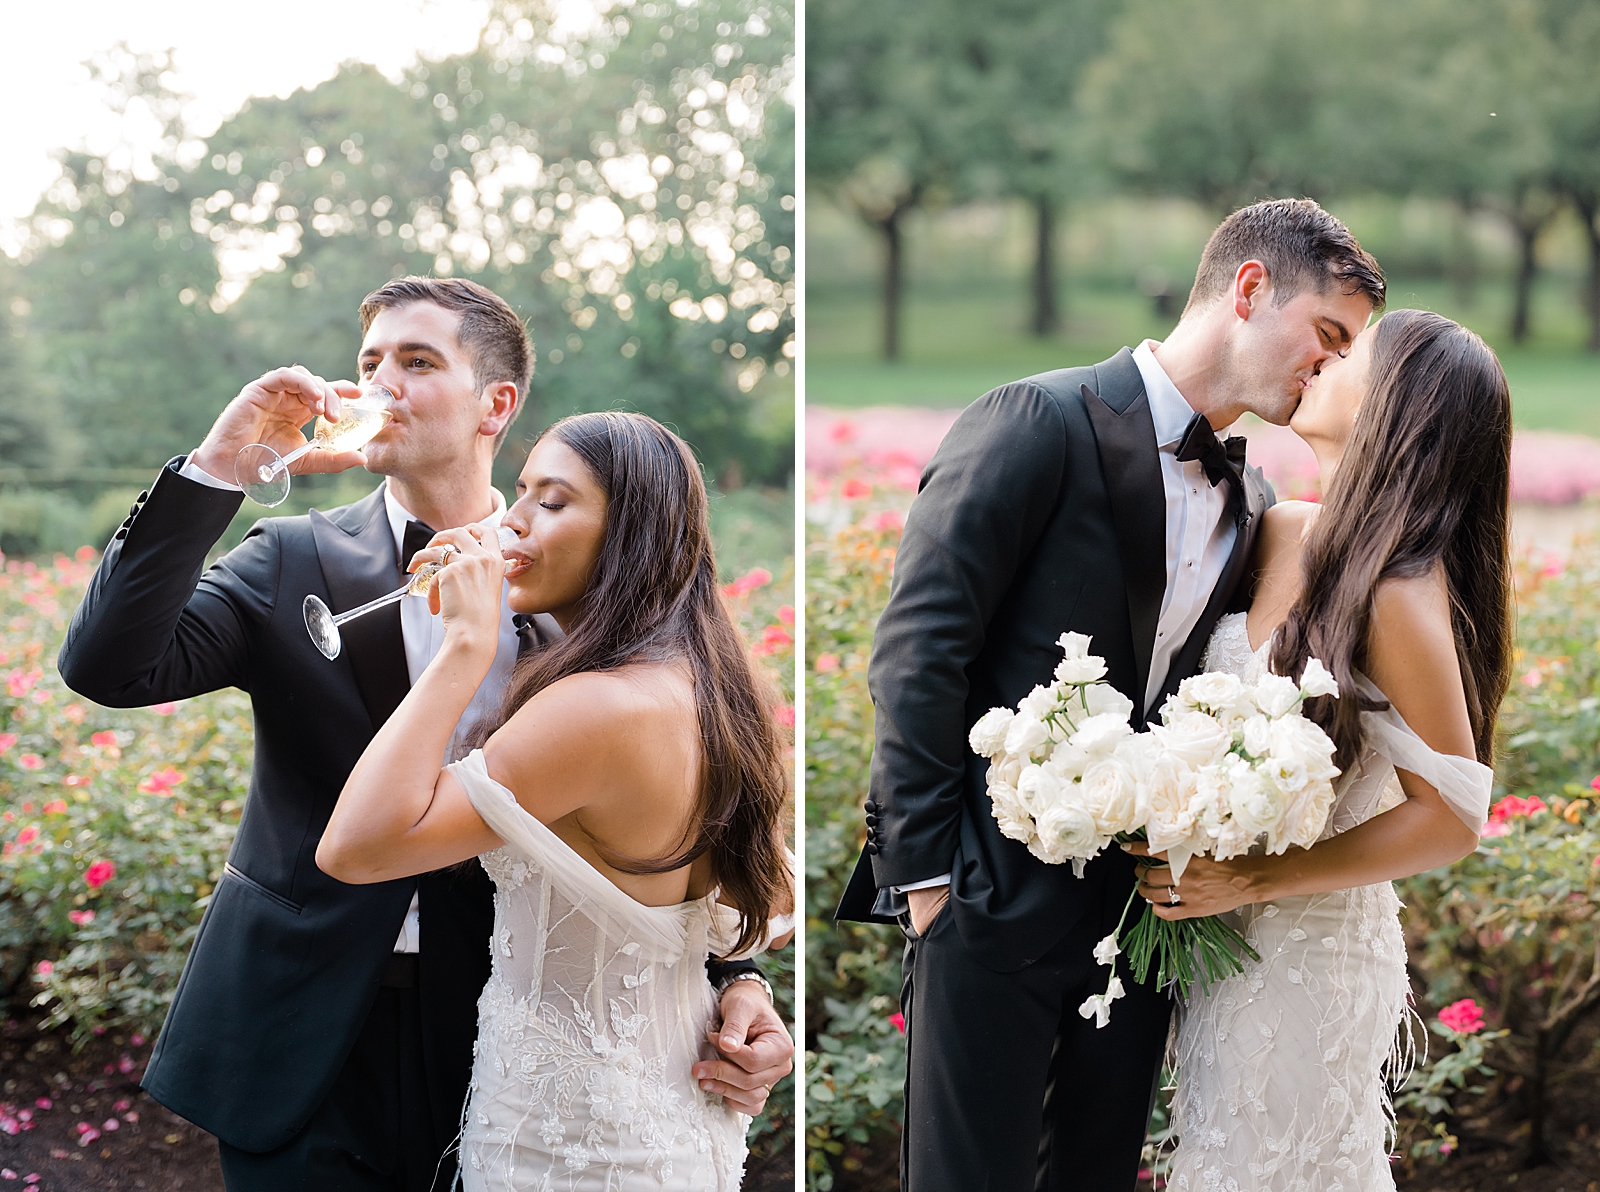 Left photo: Shot of the bride and groom enjoying champagne as they embrace. 
Right photo: Shot of the bride and groom sharing a kiss. 